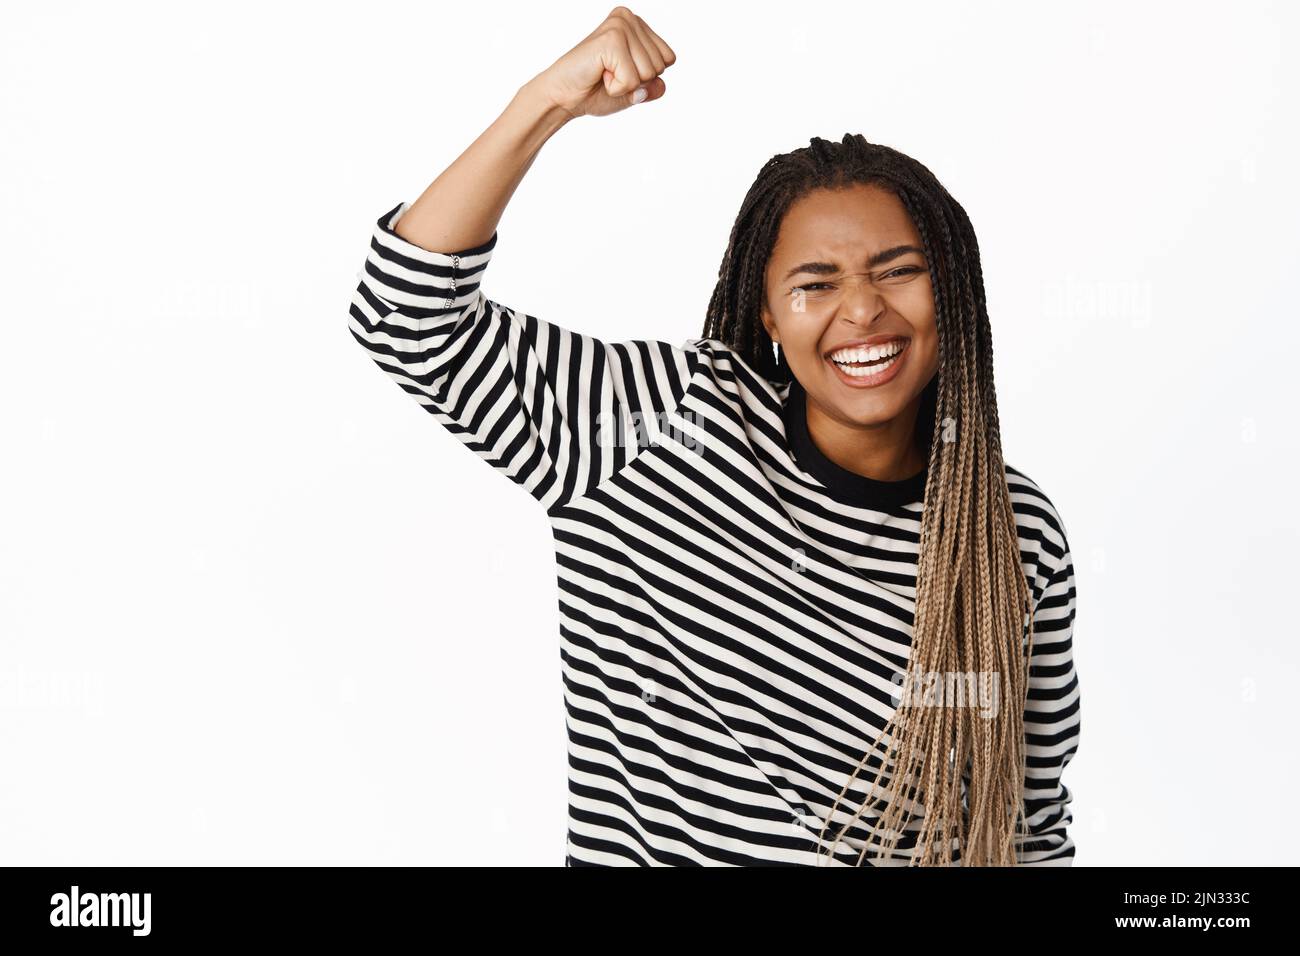 Excited black girl raising fist up, protesting, female activist chanting and rooting, celebrating victory, supporting team, standing over white Stock Photo